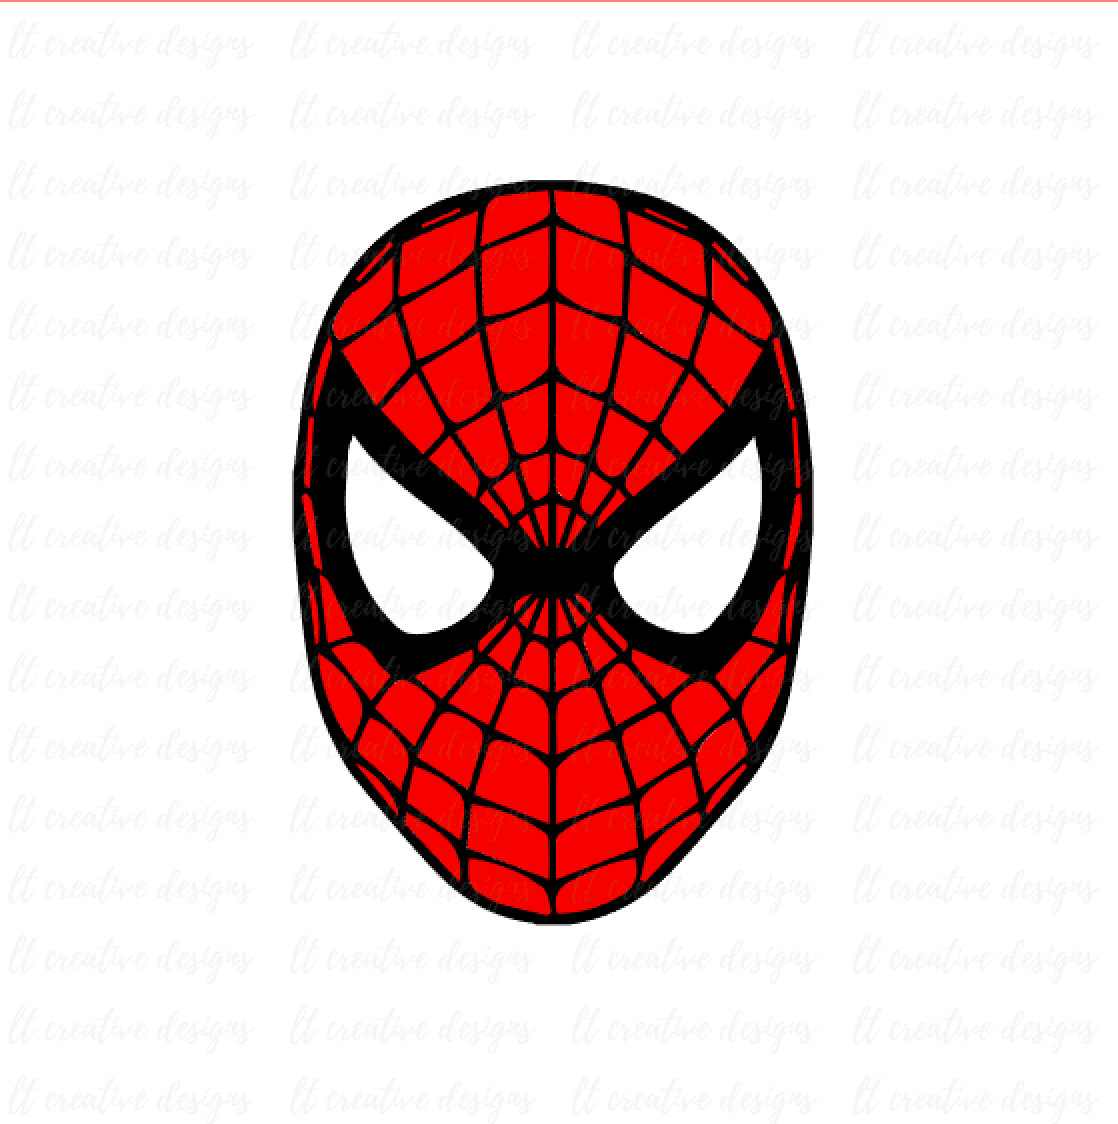 Spiderman face clipart.